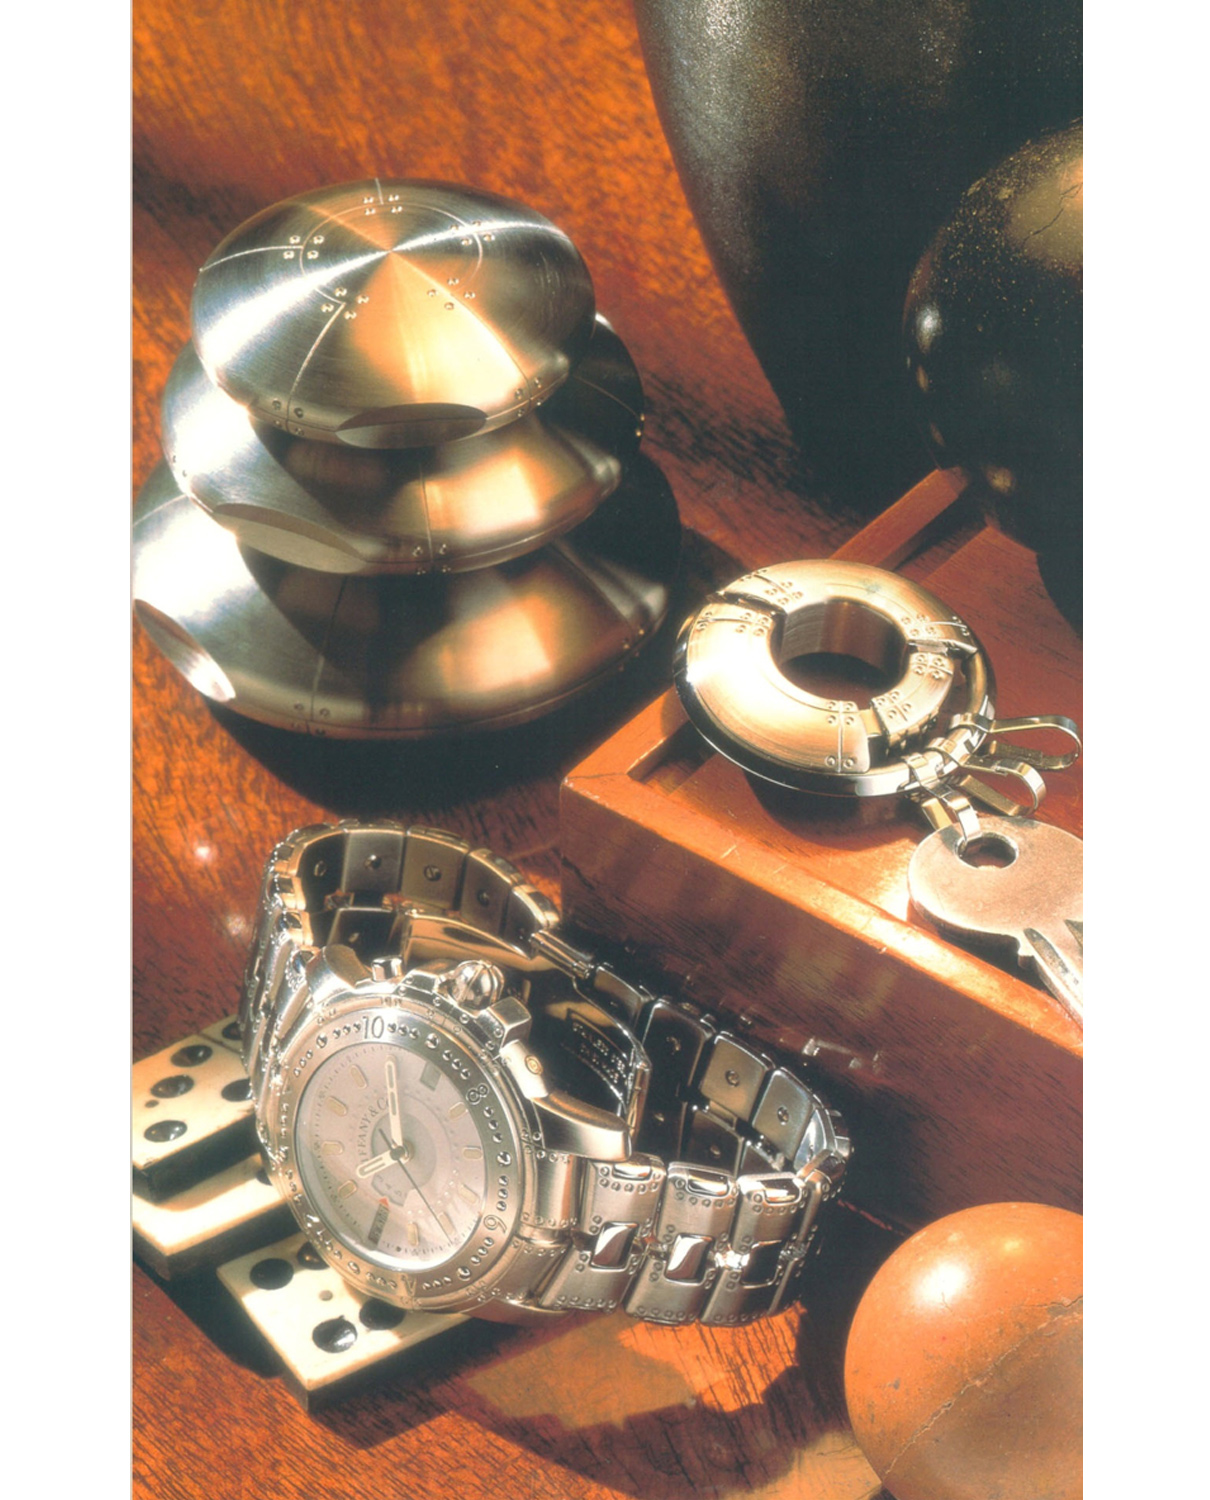 Loring’s 1997 Book: Tiffany's 20th Century: A Portrait of American Style. Perisphere Nesting Boxes in three sizes, Porthole Keychain, and World Time Wristwatch with Stainless Steel Band.